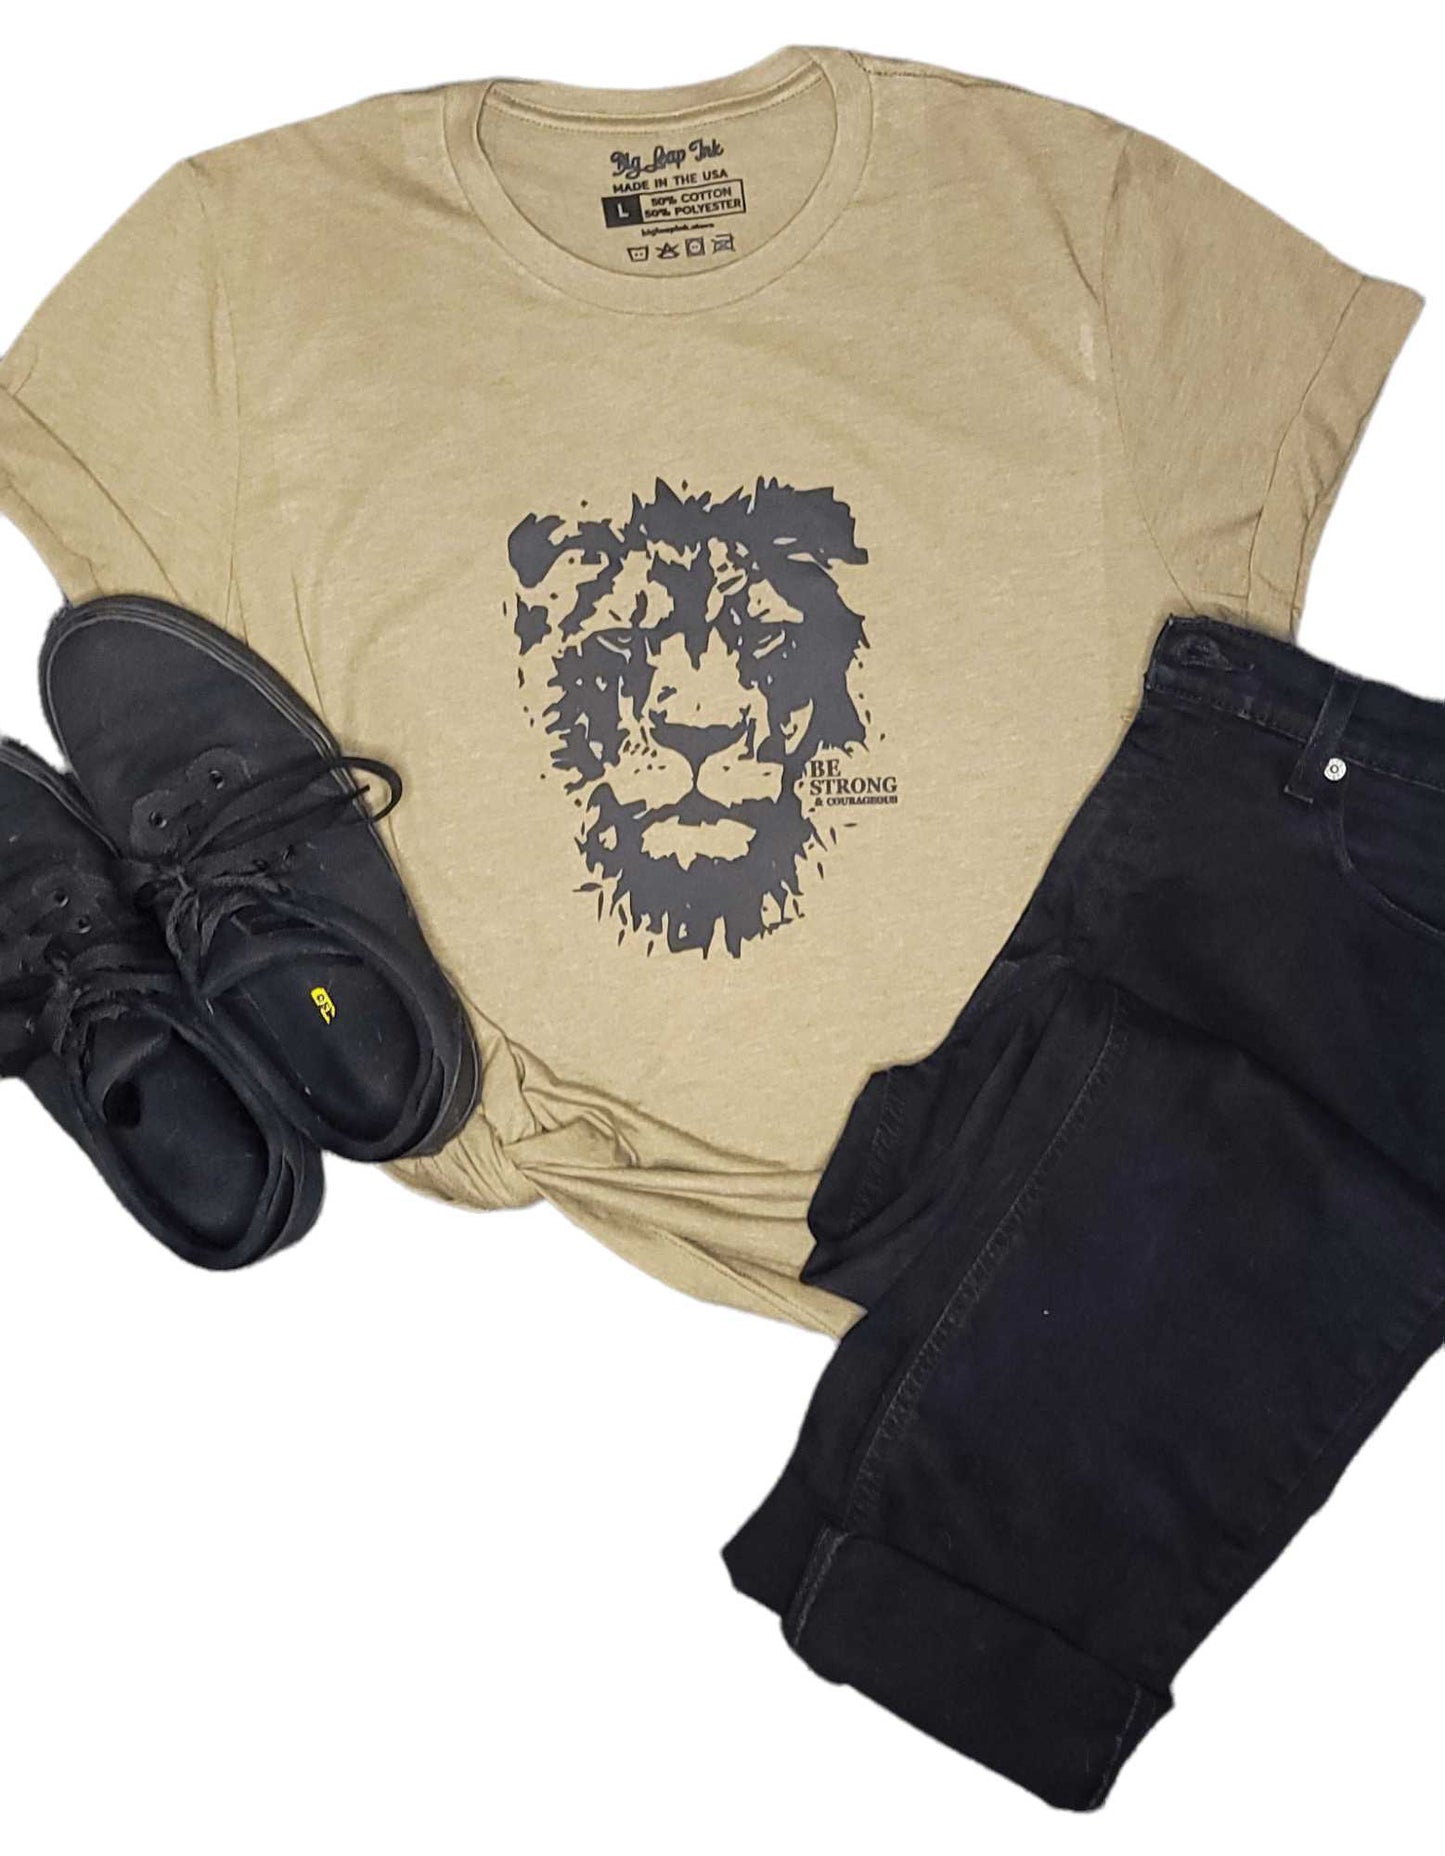 Be Strong & Courageous Lion Heathered Unisex Shirt Big Leap Ink Shirts & Tops  Big Leap Ink 